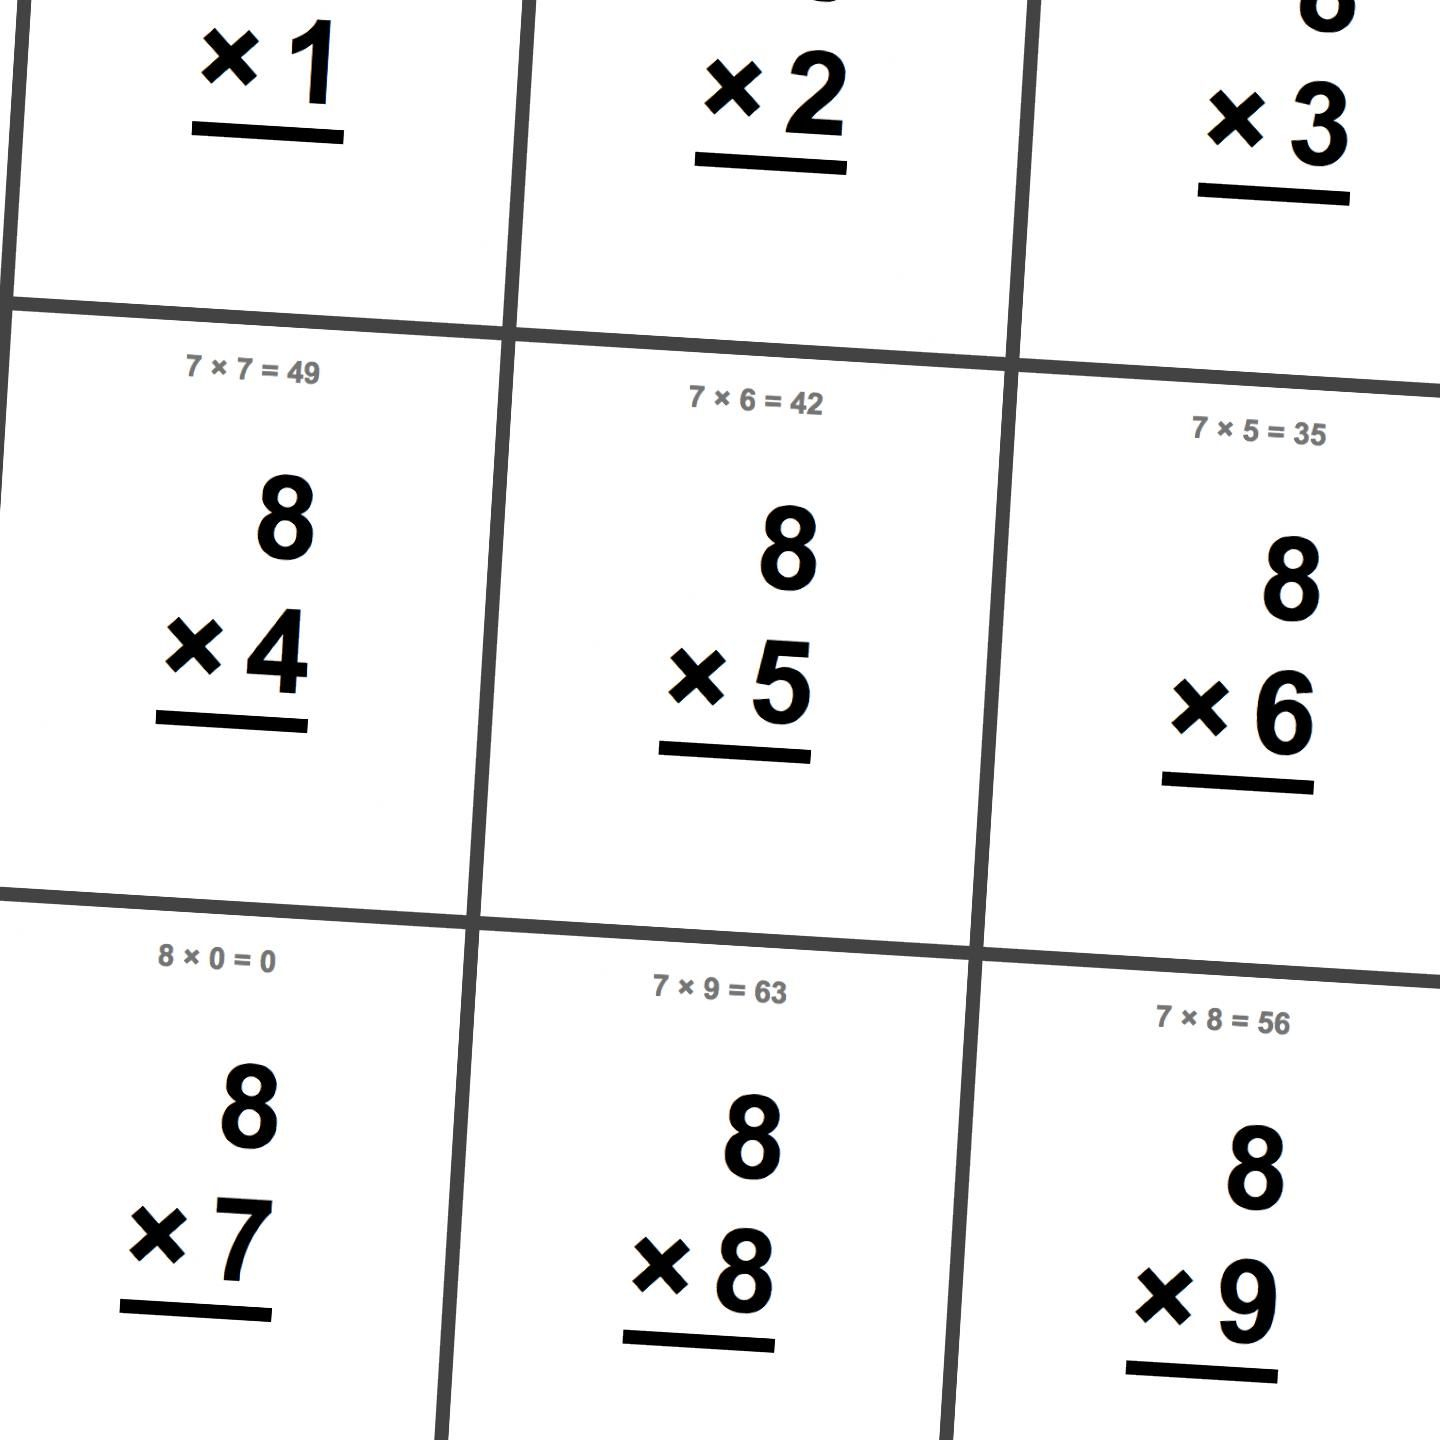 basic-multiplication-facts-flash-cards-printable